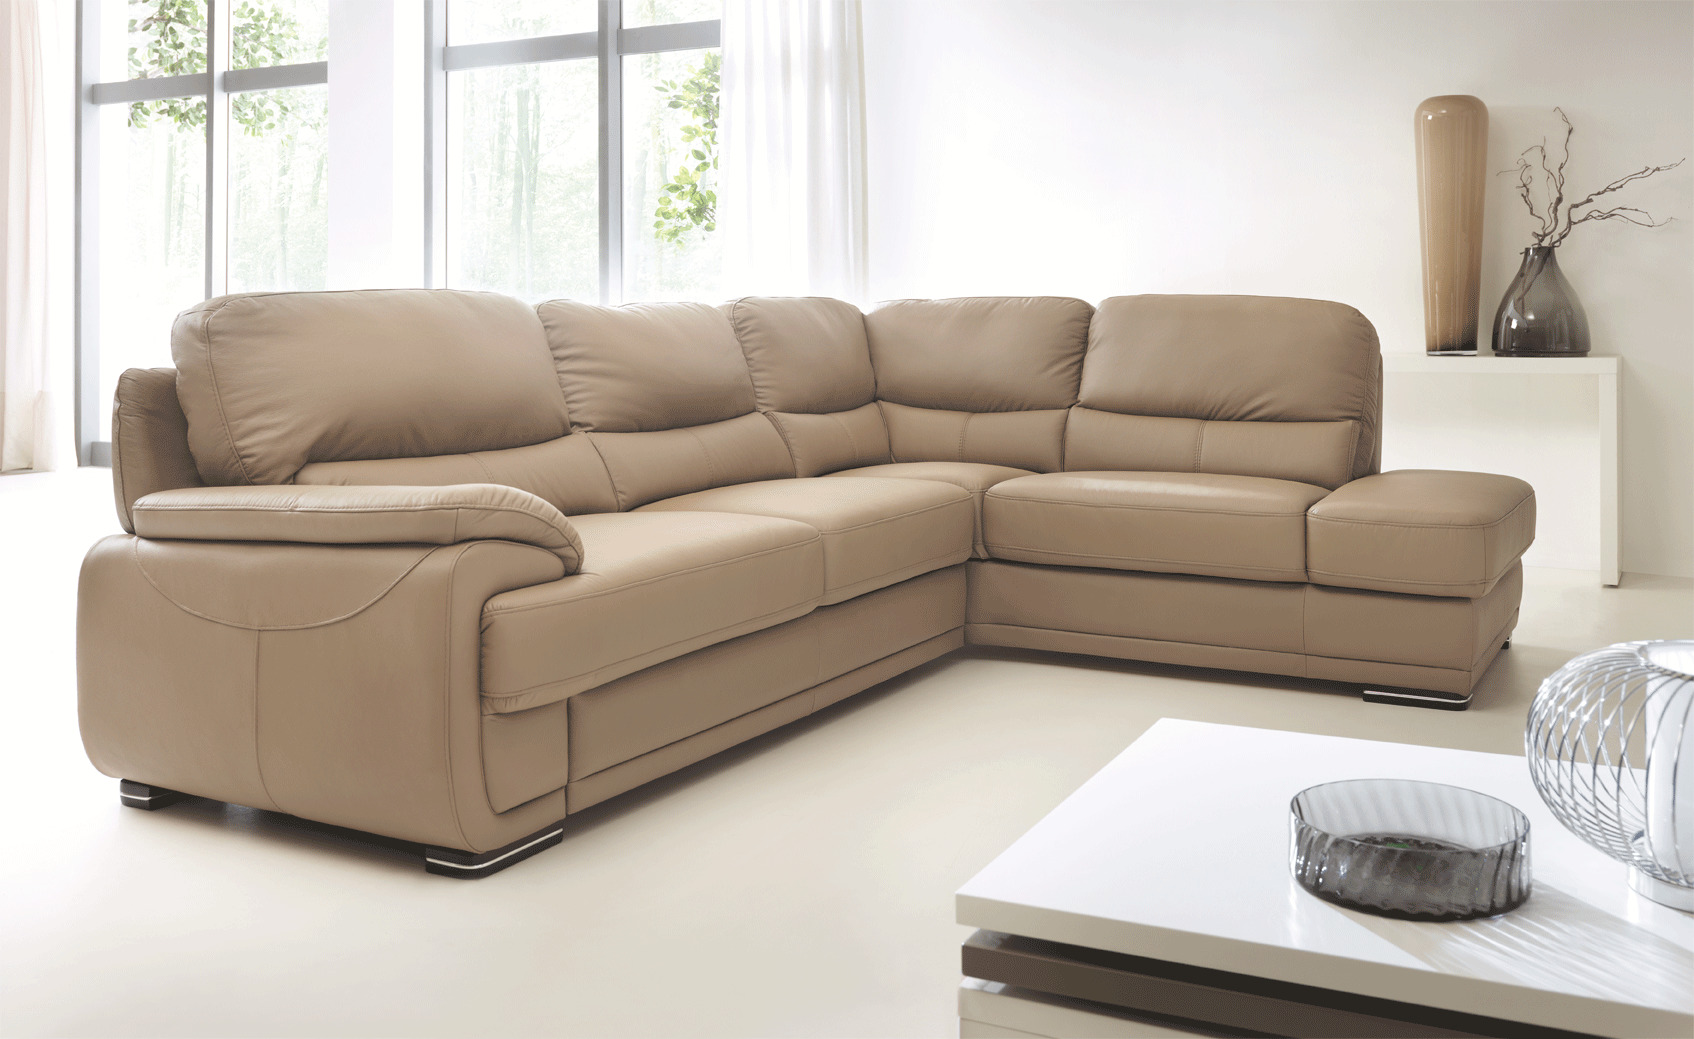 leather sleeper sectional sofa bed